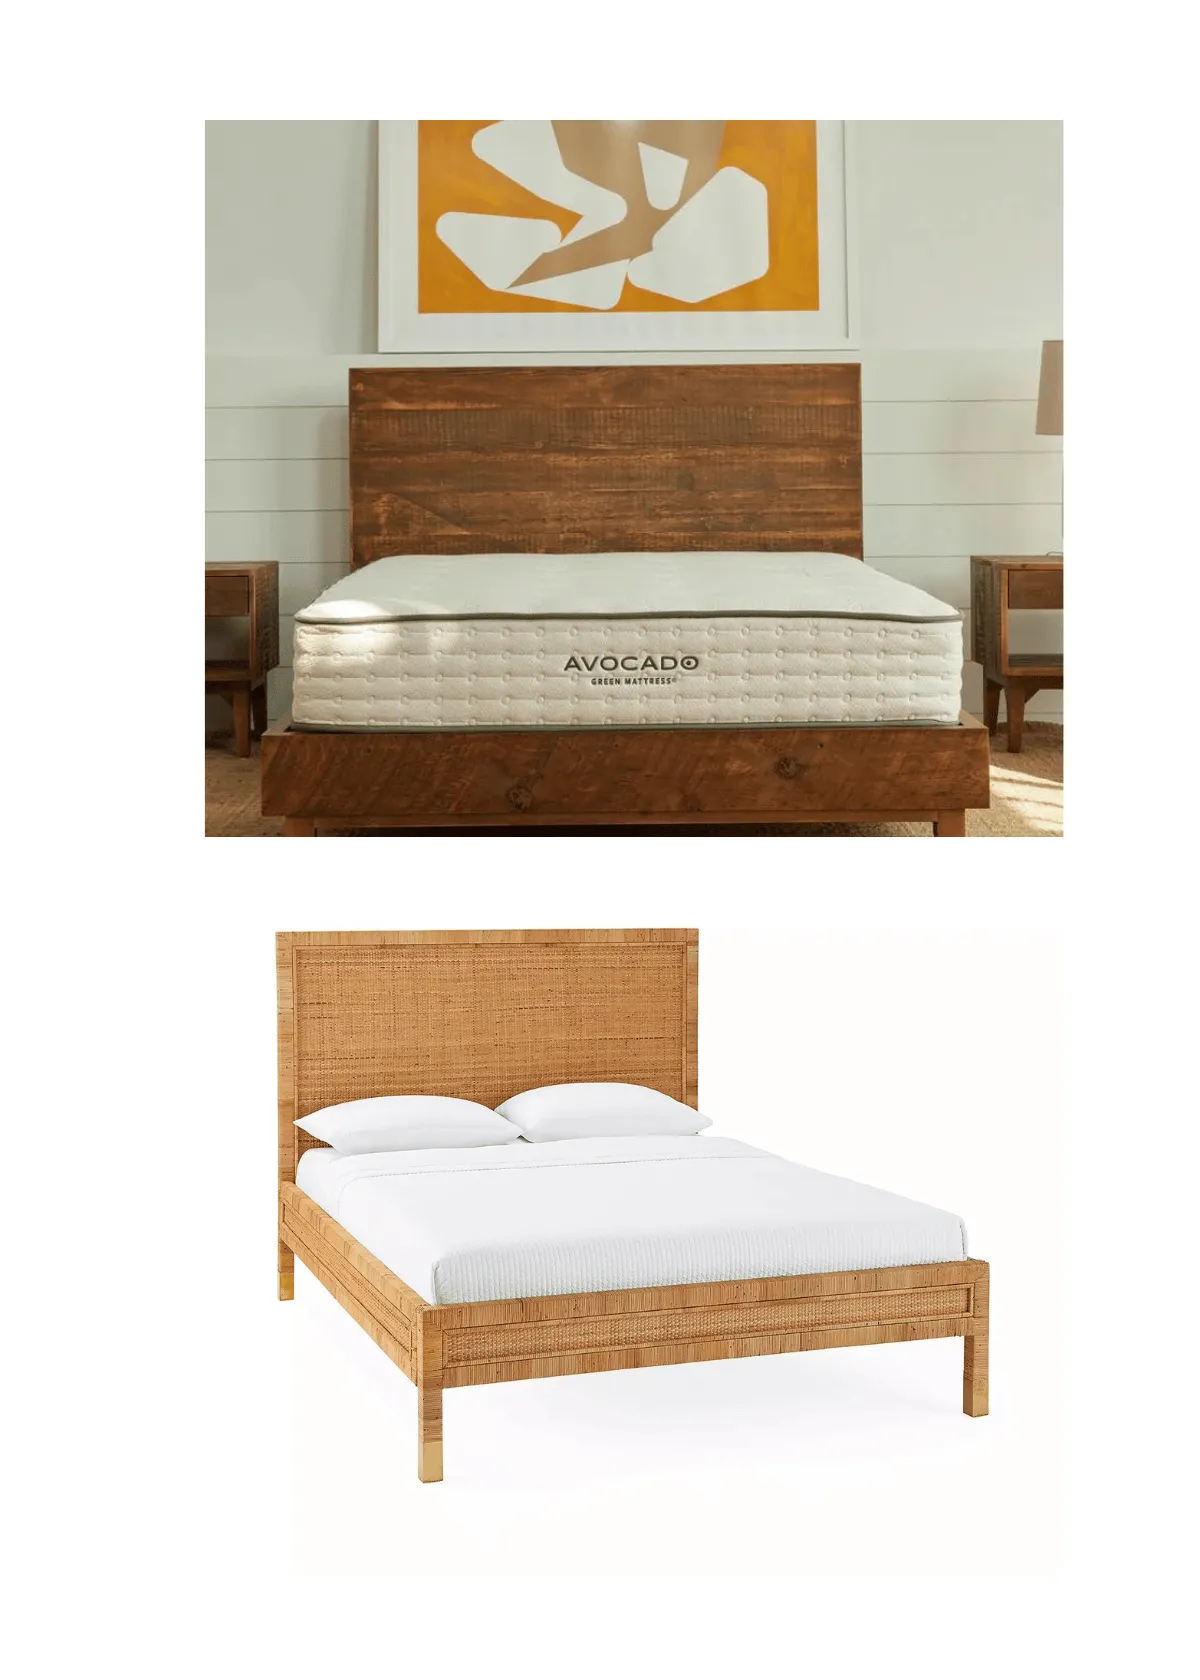 "Eco-Friendly Bed Frame Materials: Bamboo, reclaimed Wood & More"